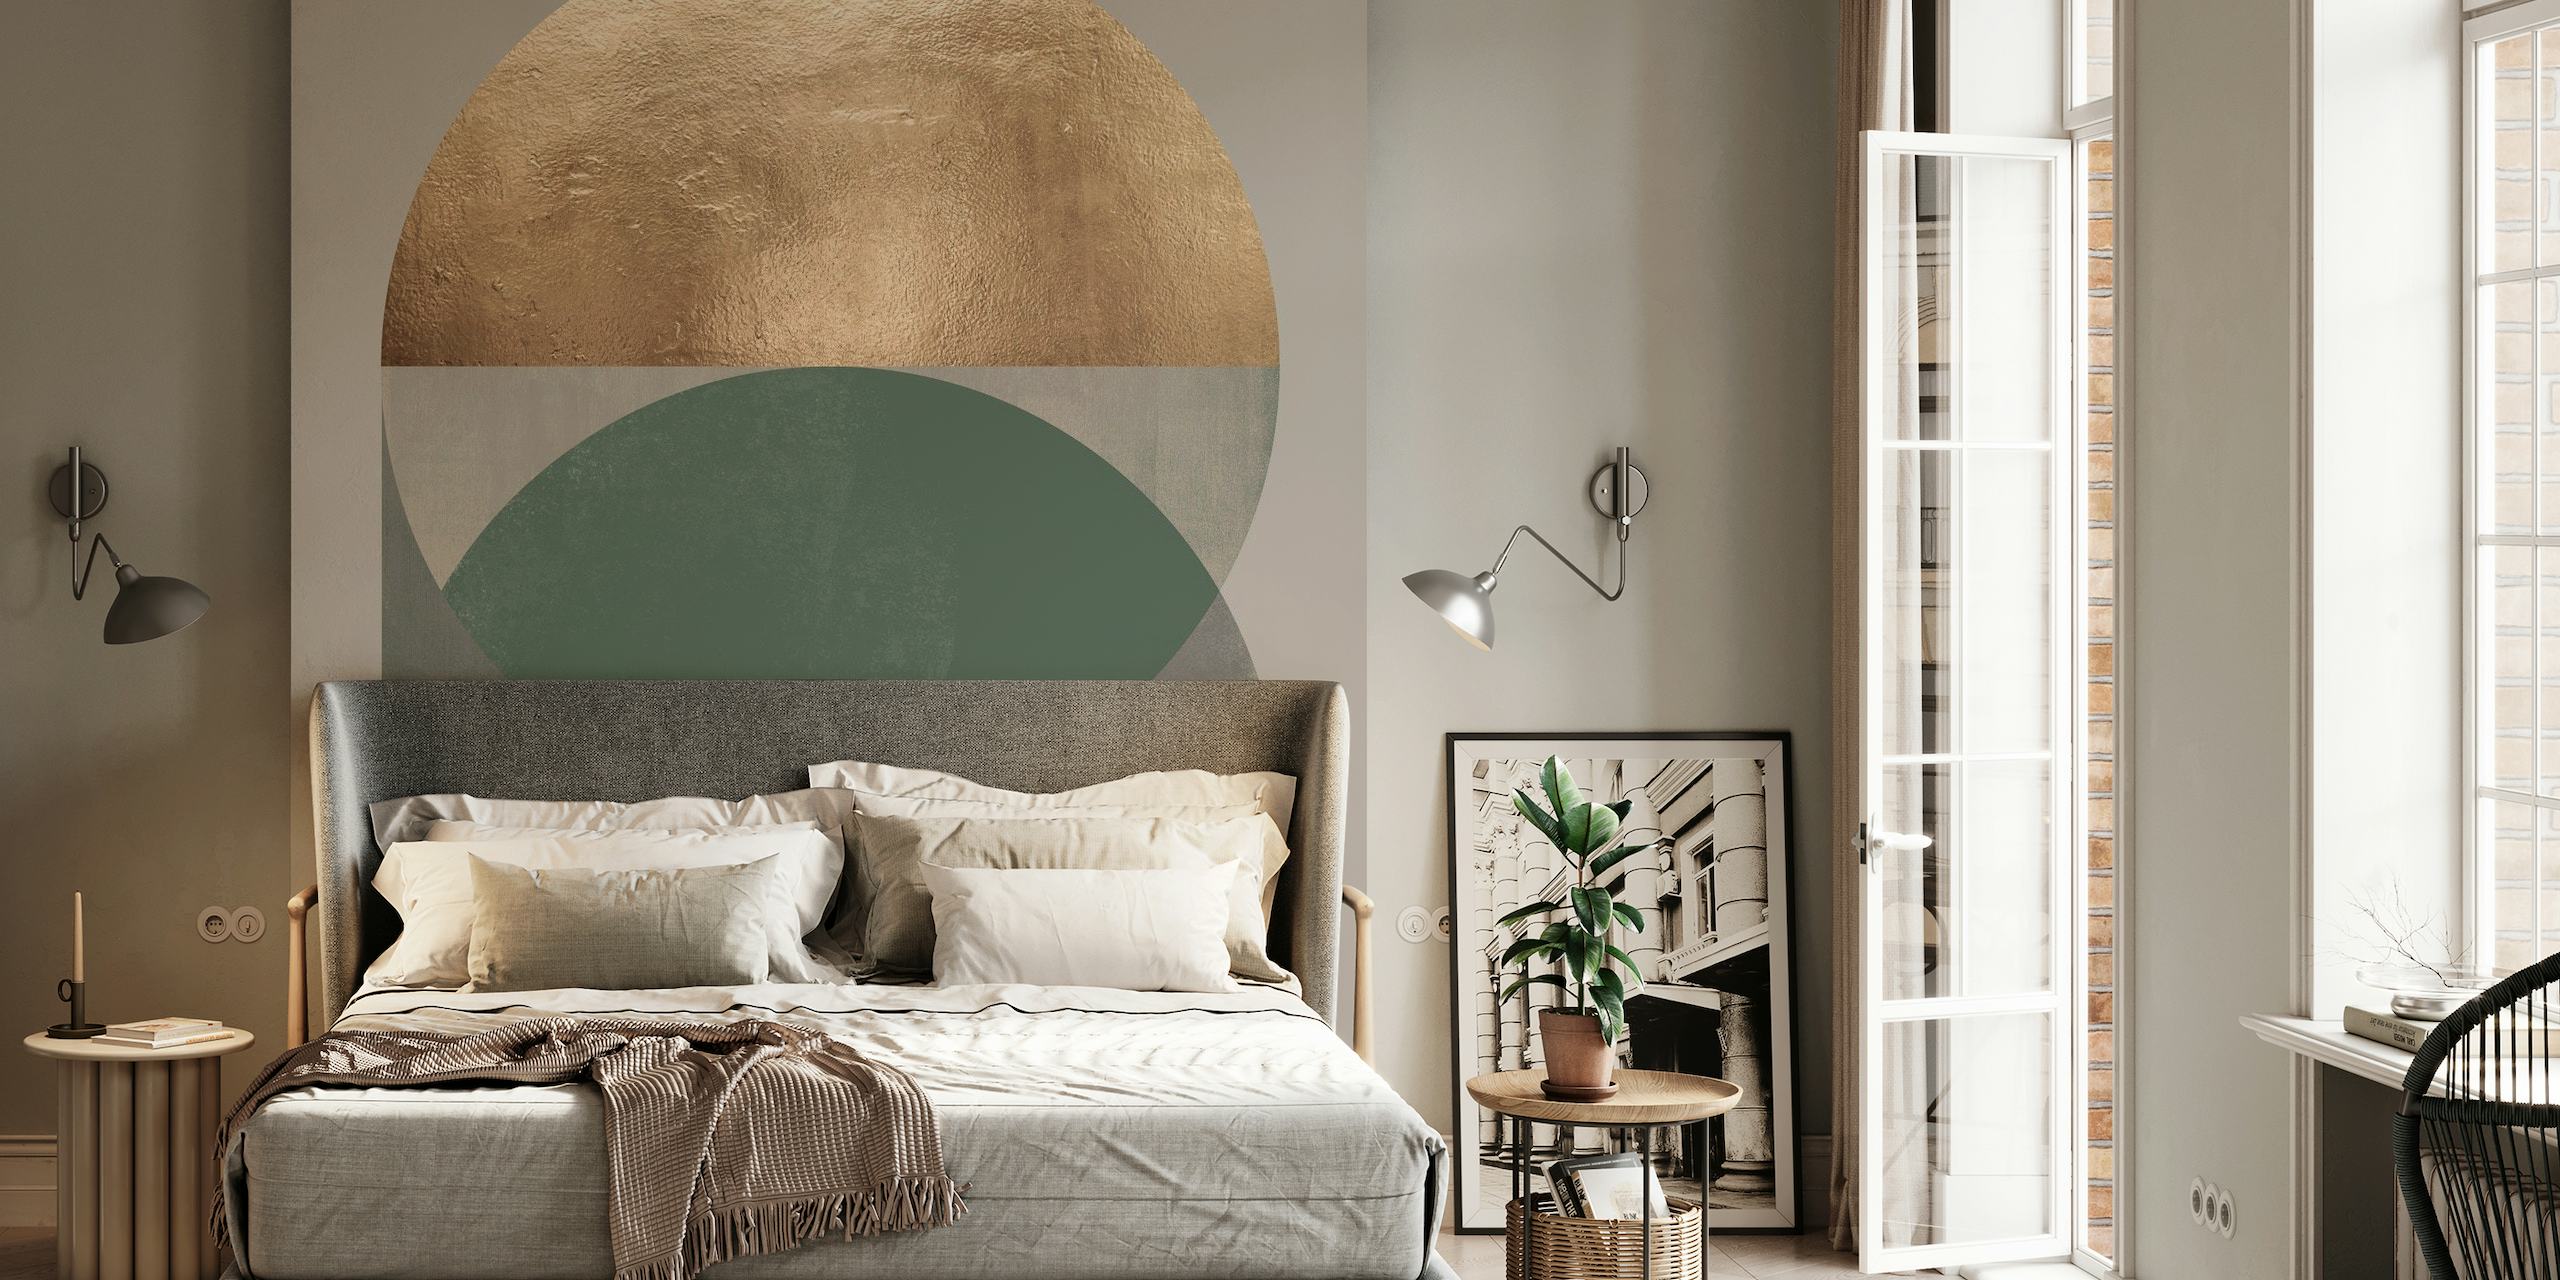 Contemporary Nardo Gray VIII geometric wall mural with gold and green accents